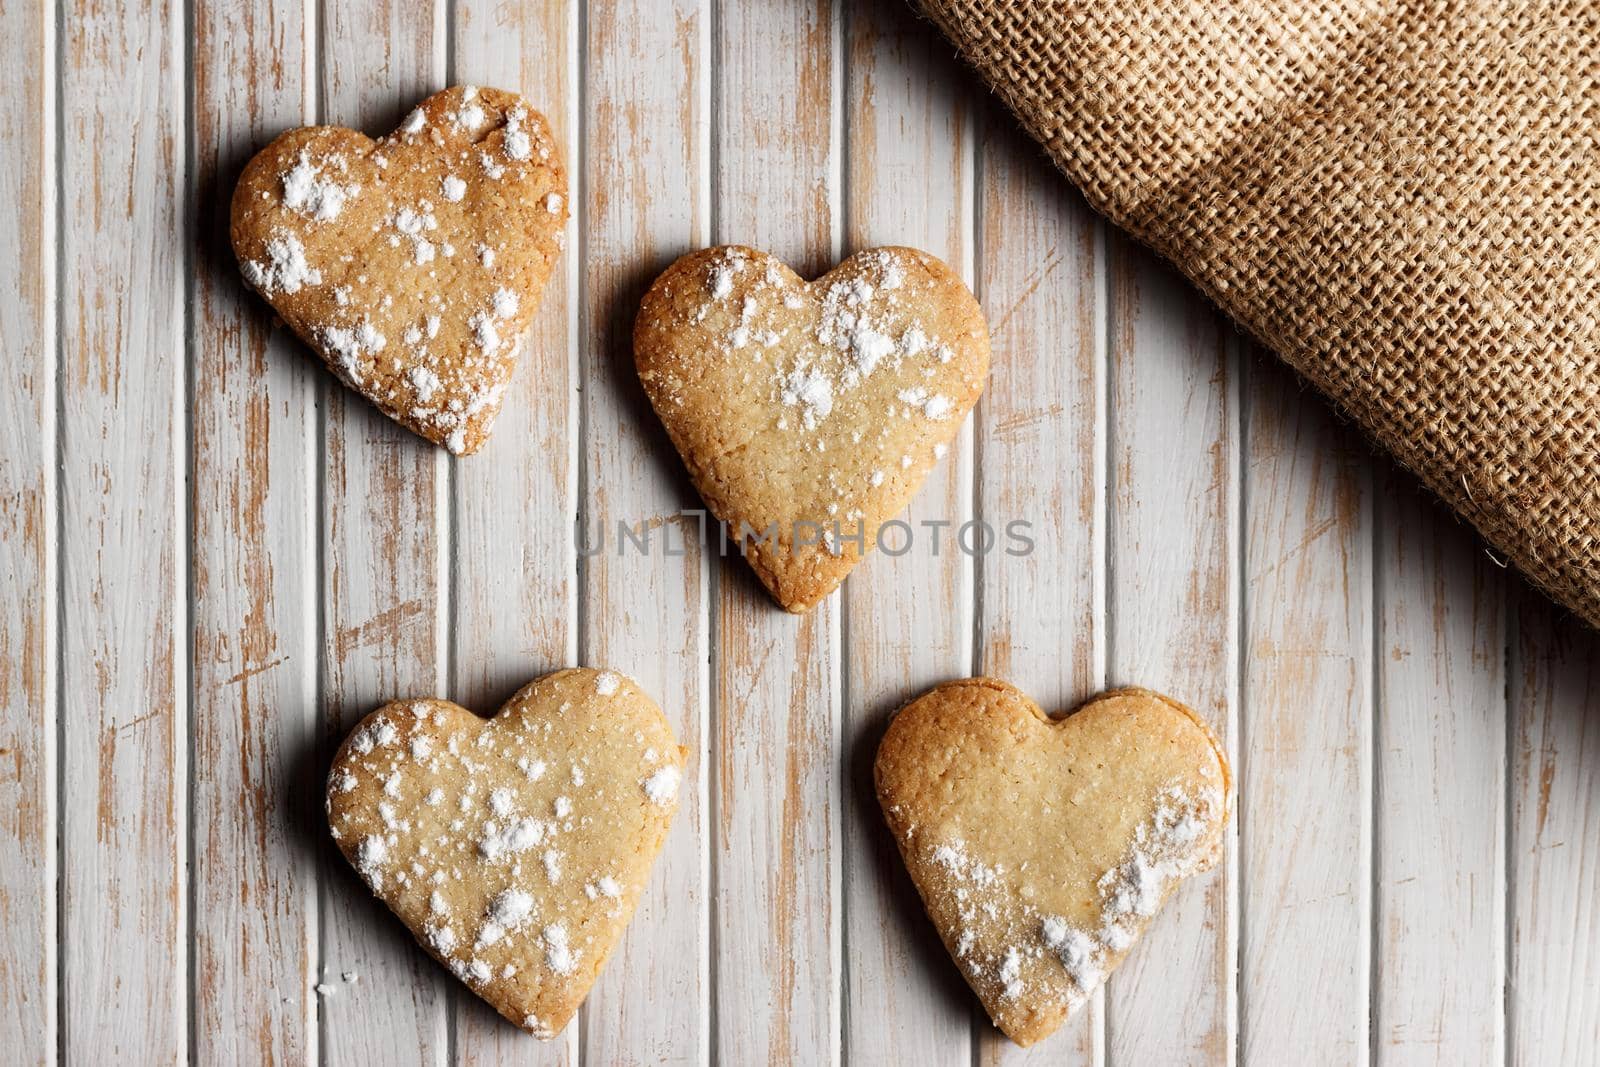 Delicious home-made heart-shaped cookies sprinkled with icing sugar in a wooden board. Horizontal image seen from above. 